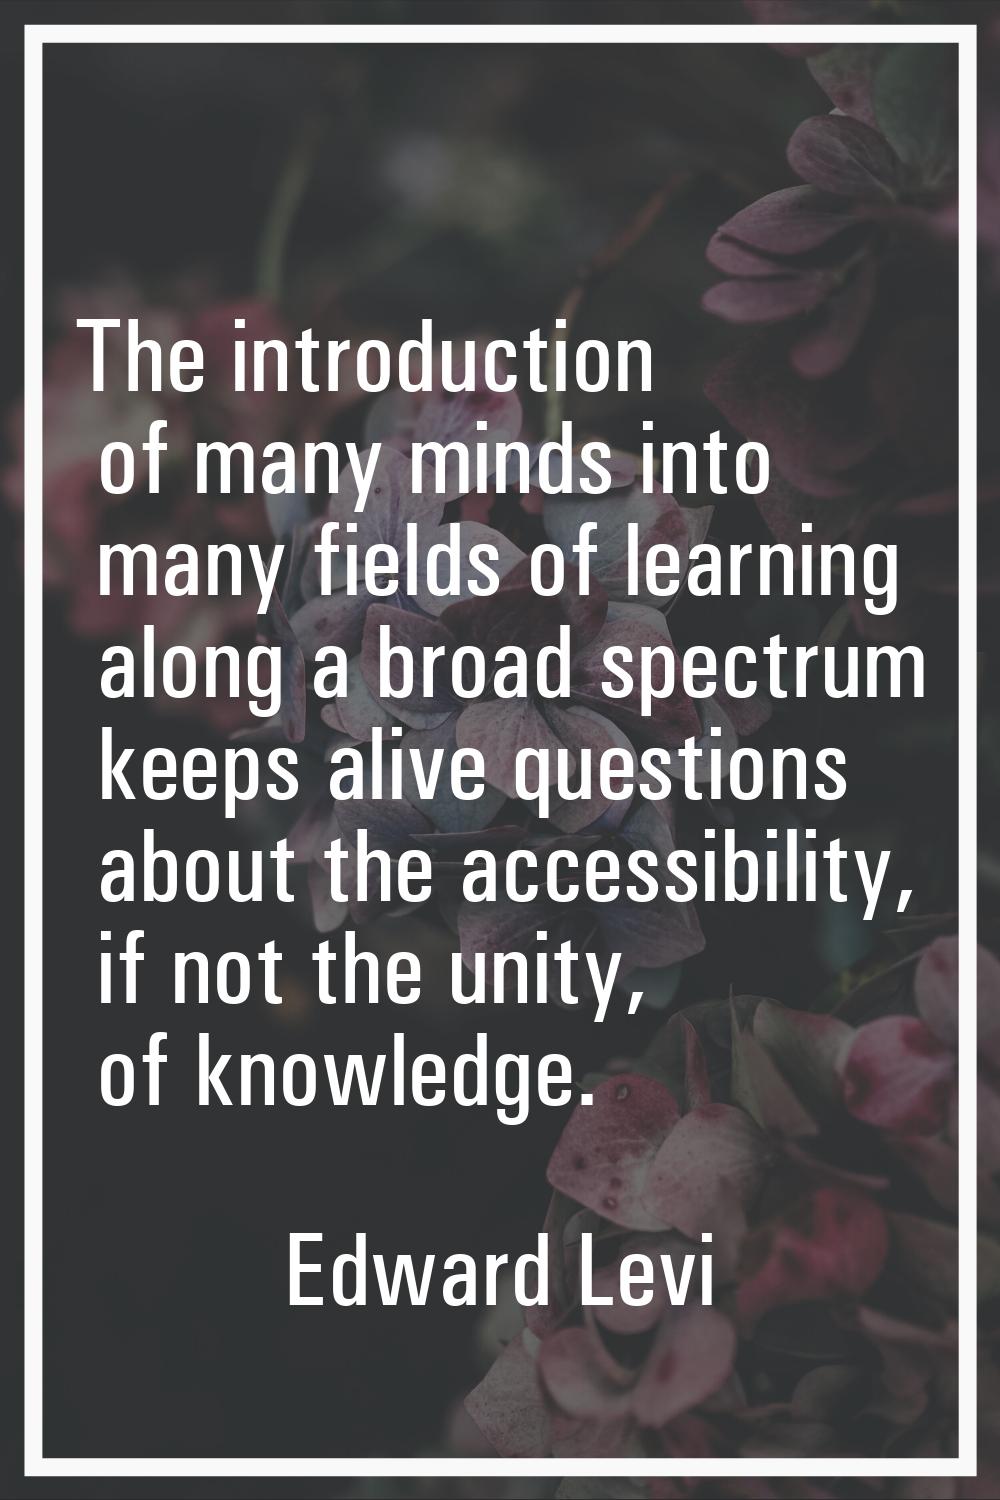 The introduction of many minds into many fields of learning along a broad spectrum keeps alive ques